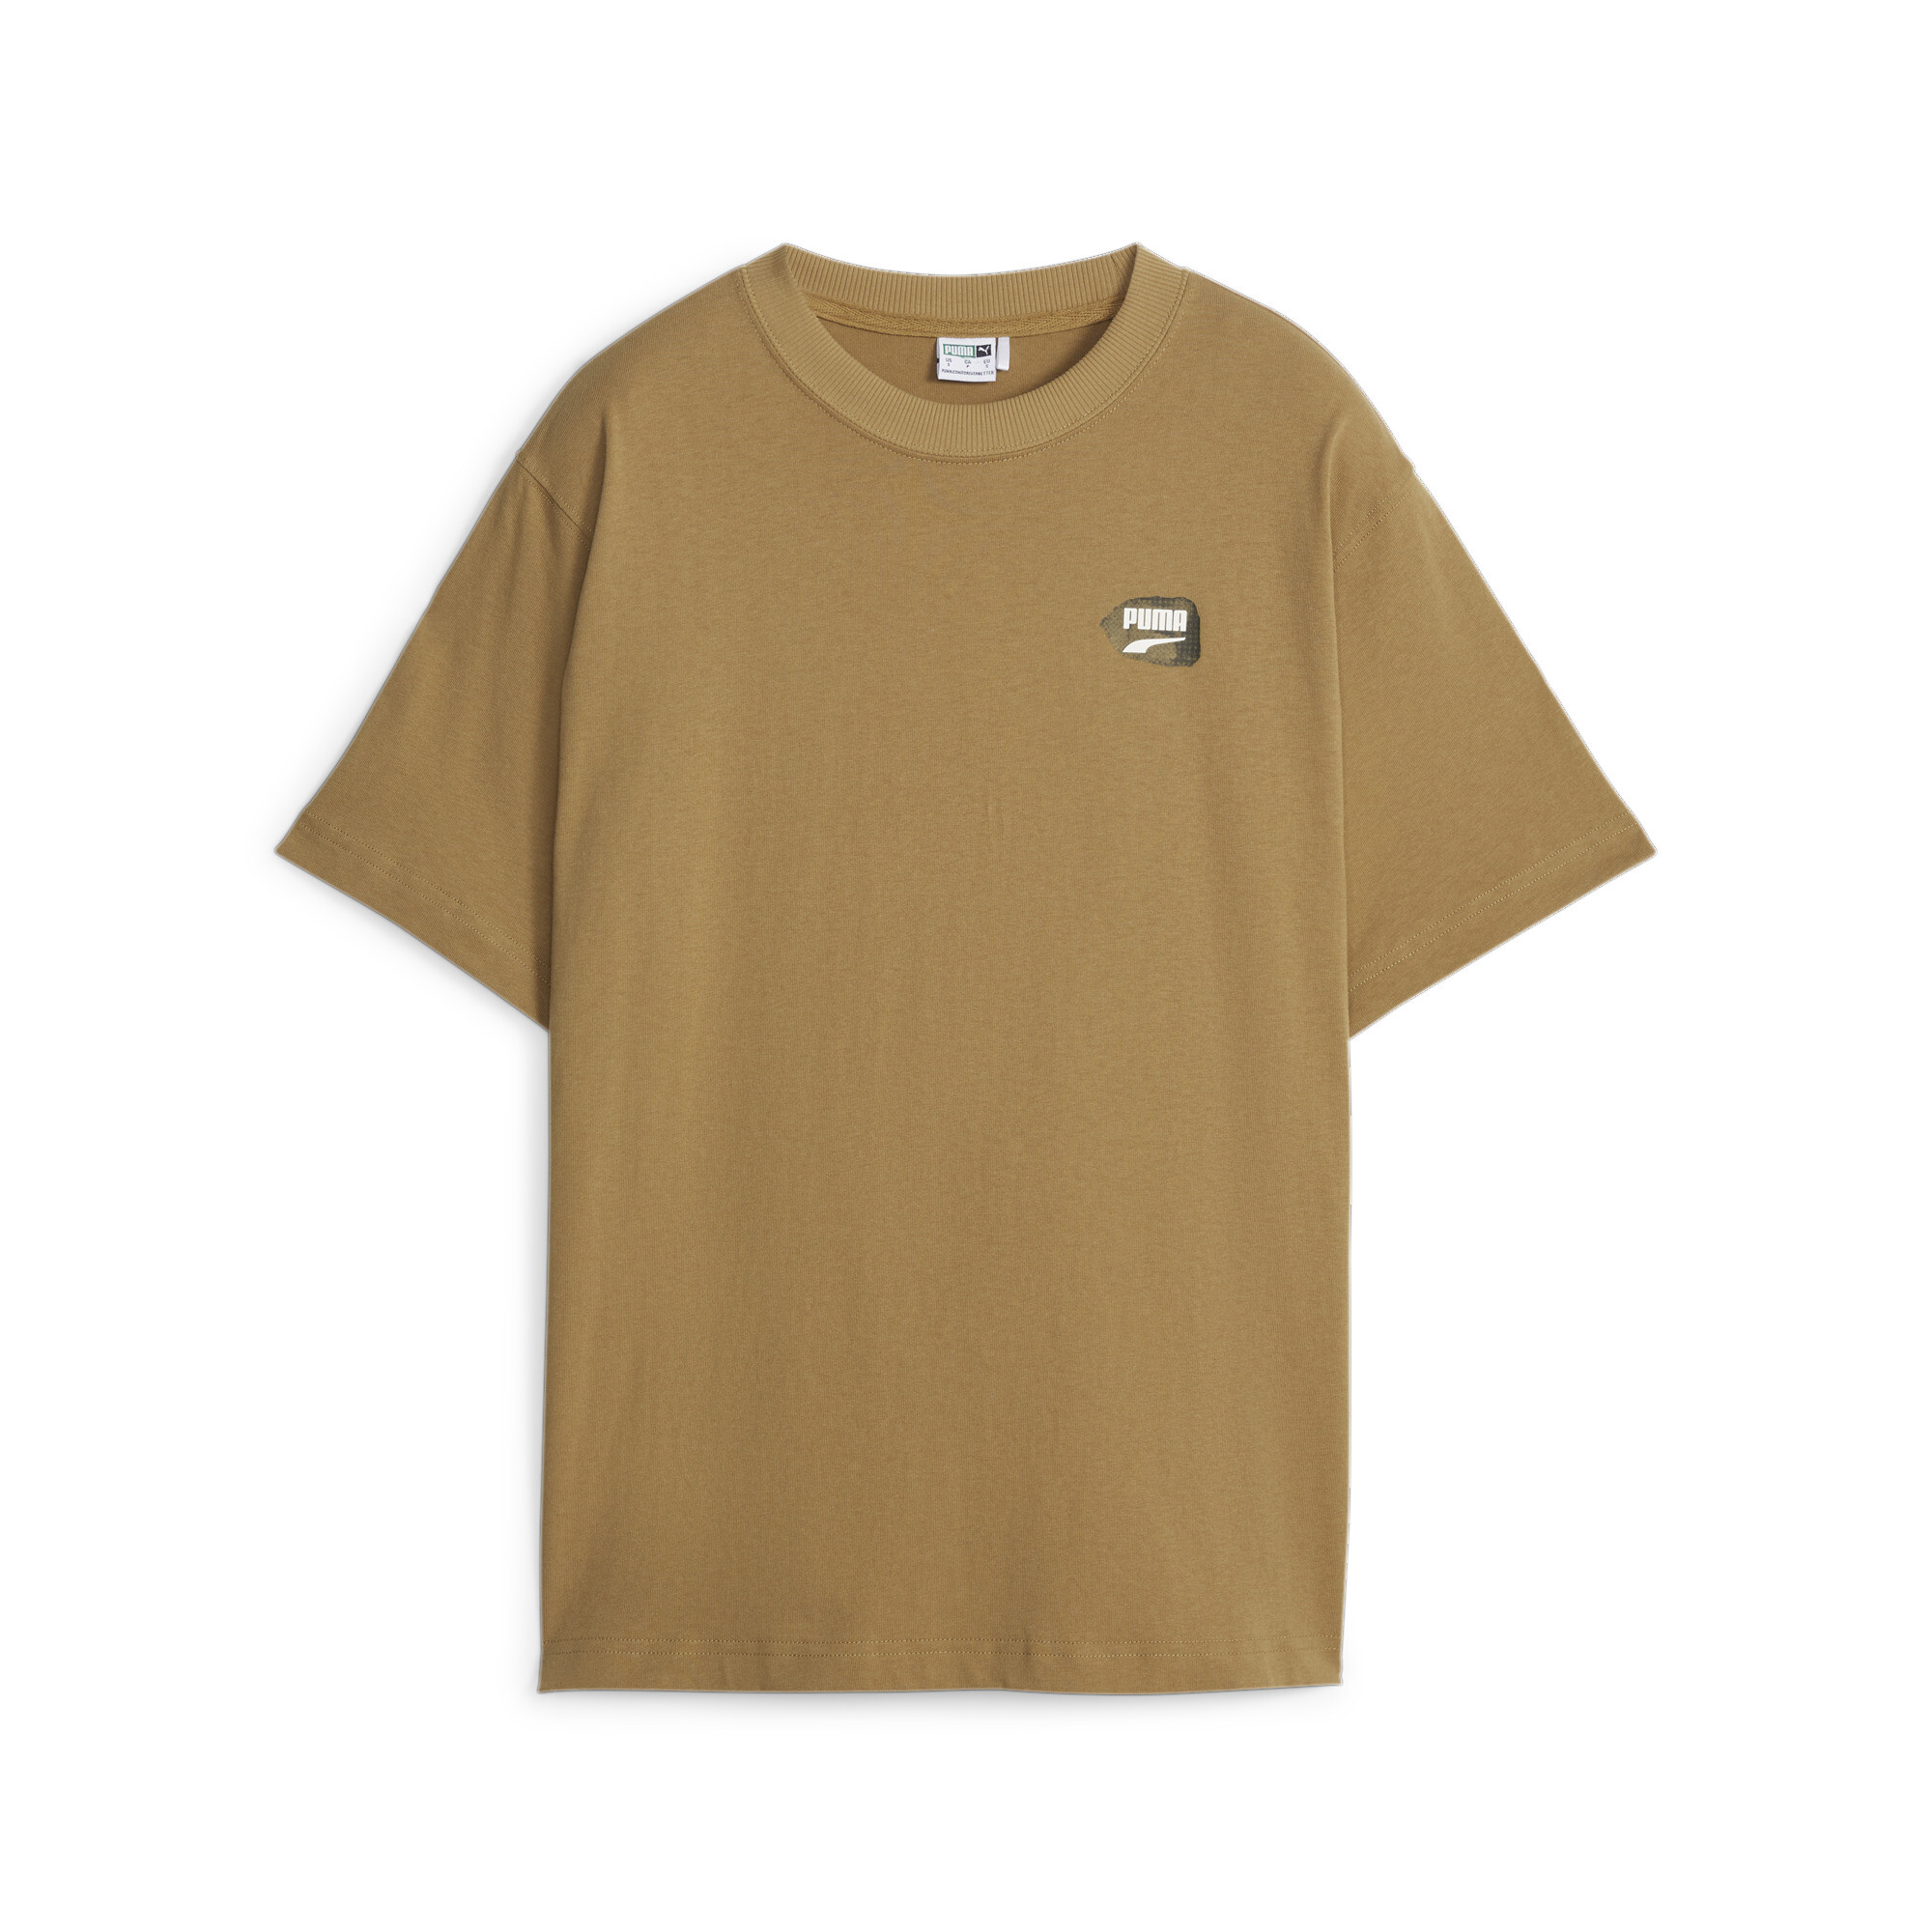 Women's PUMA DOWNTOWN Relaxed Graphic T-Shirt In Beige, Size XL